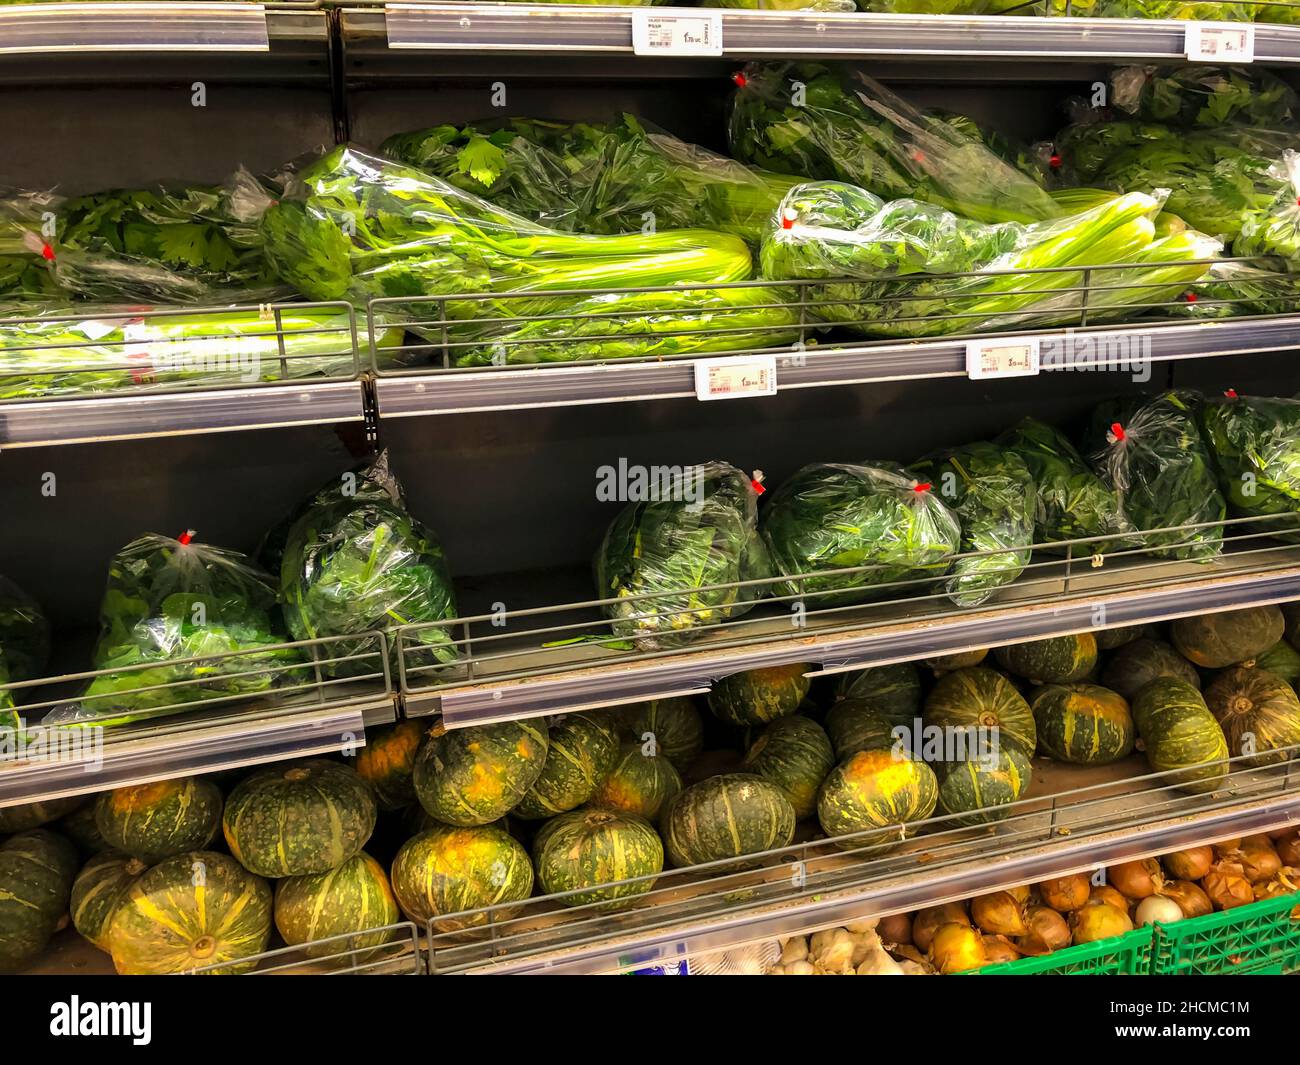 Paris, France, Close up, Fresh Vegetable in Plastic Packaging on Shelves  Shopping in Chinese Supermarket 'Tang Freres' in Chinatown, china meal vegetables Stock Photo